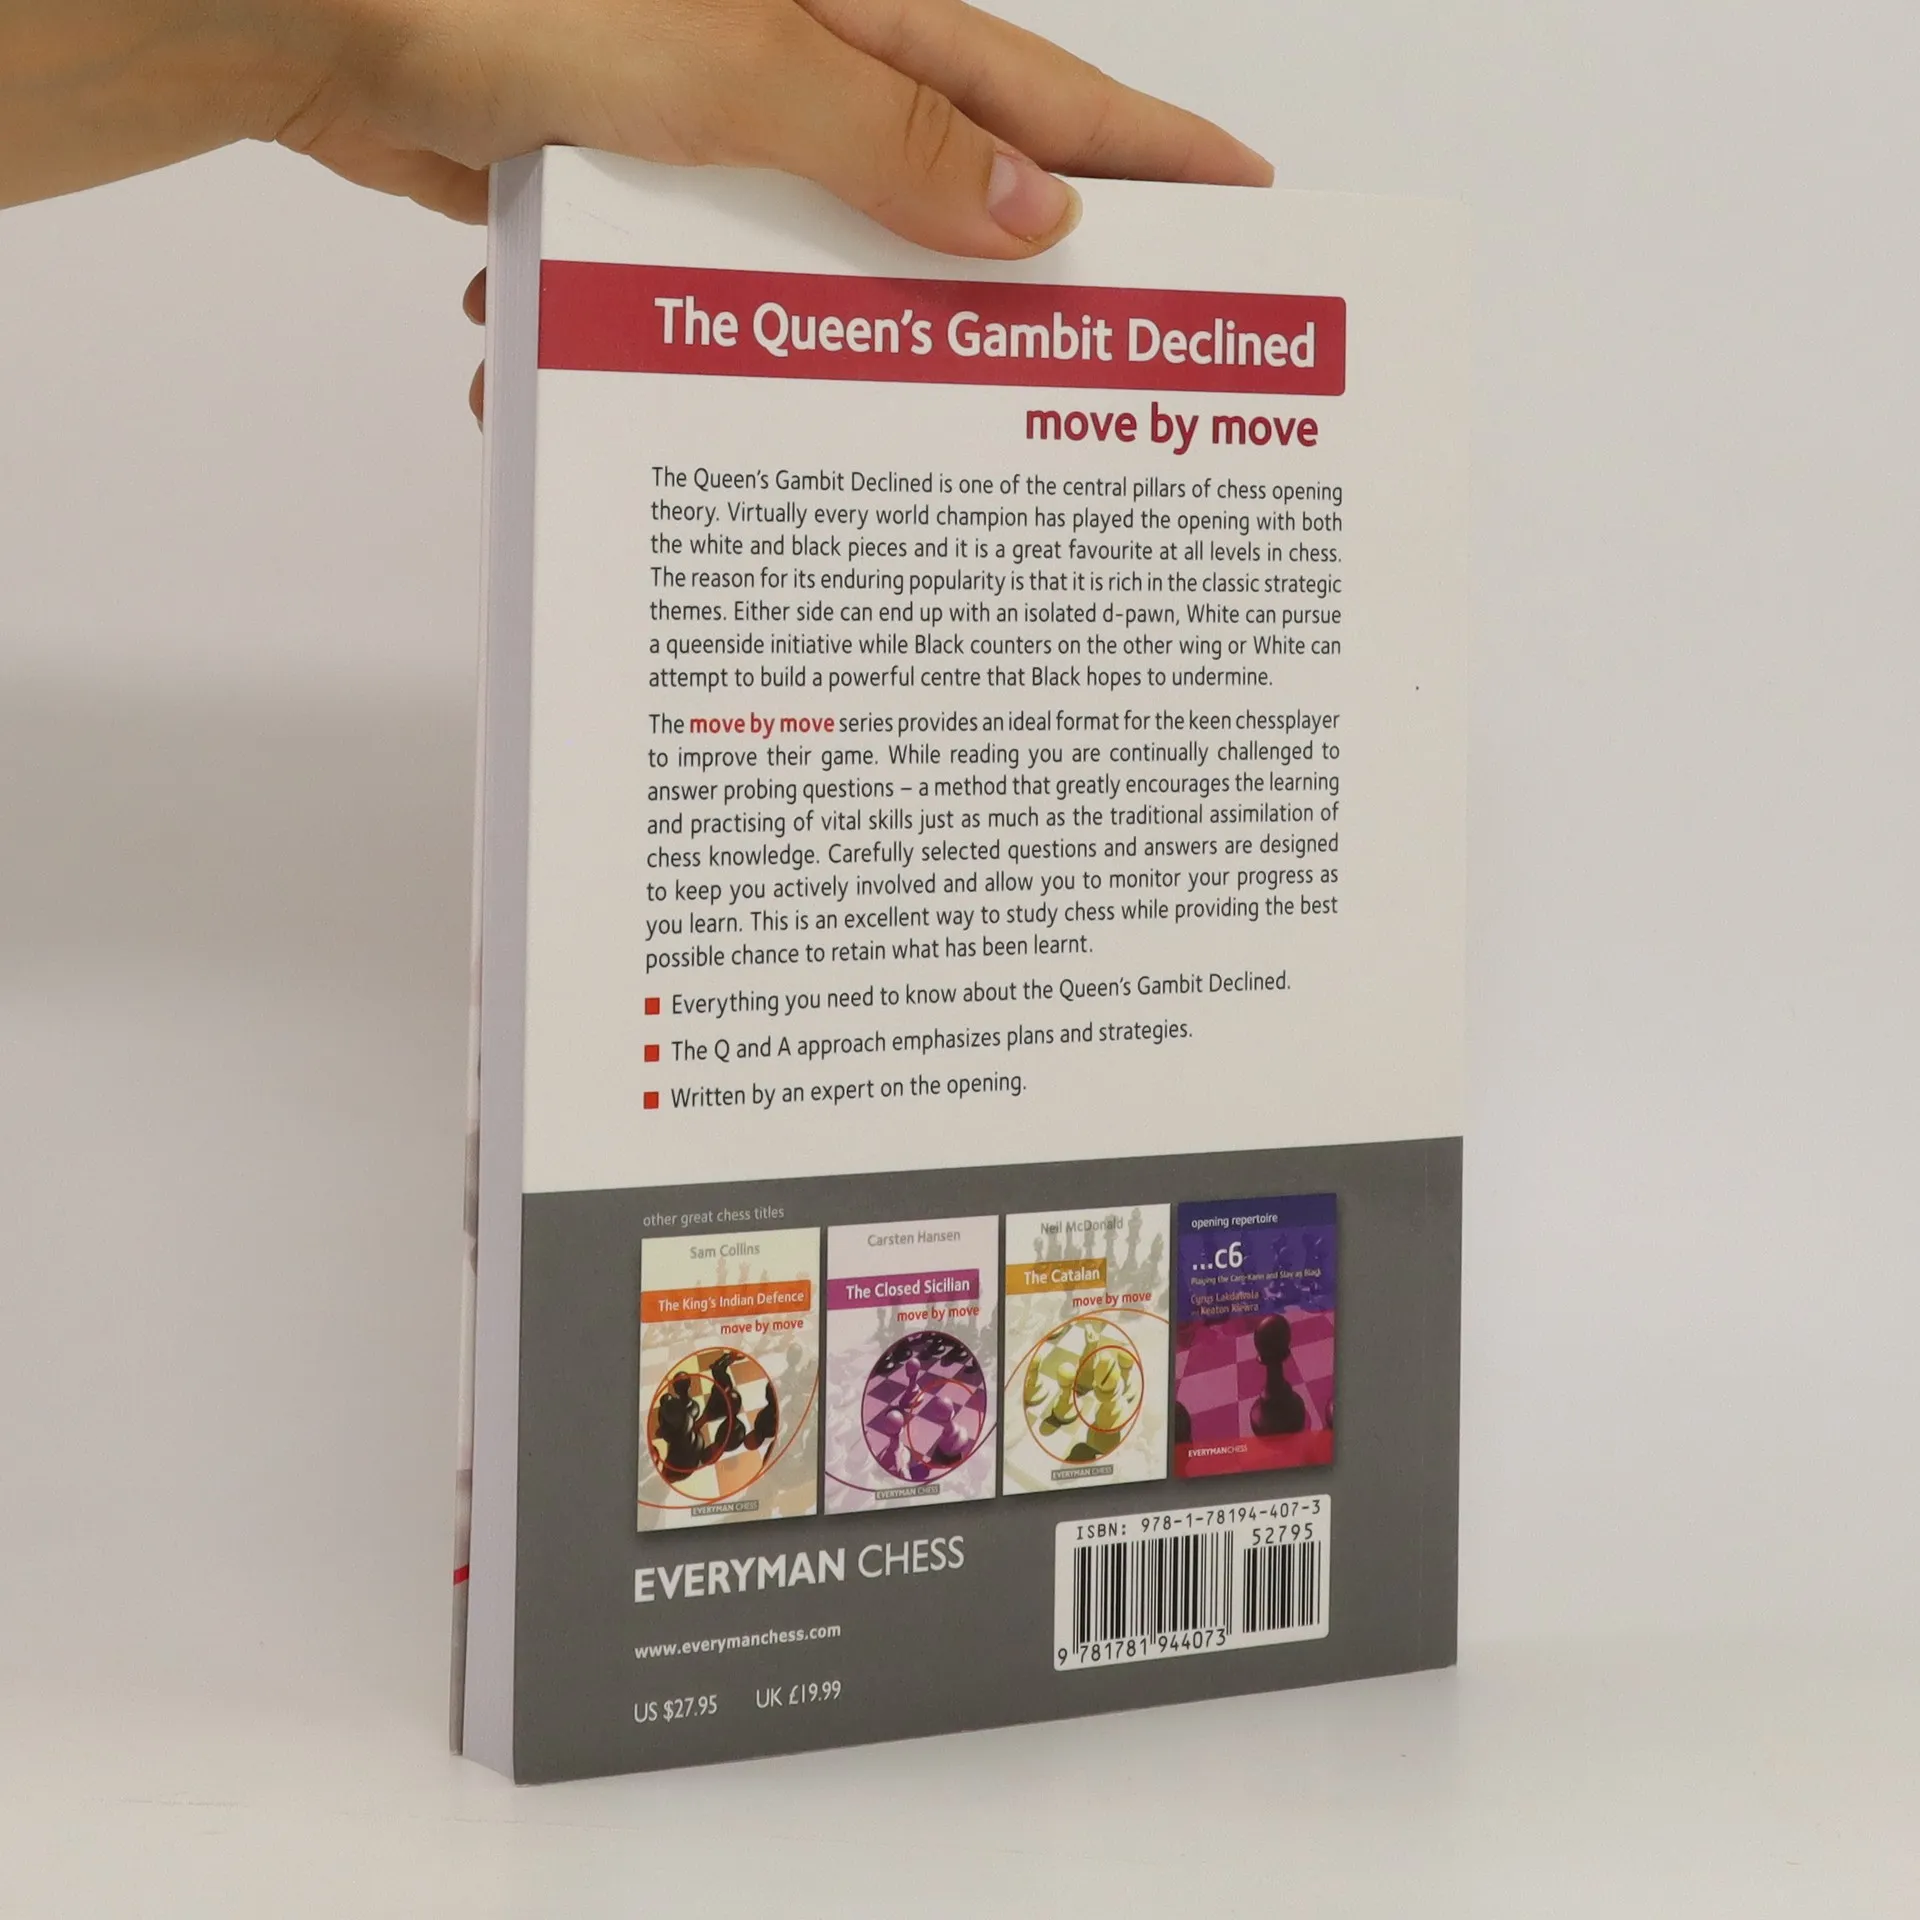 The Queen's Gambit Declined: Move by Move by Davies, Nigel